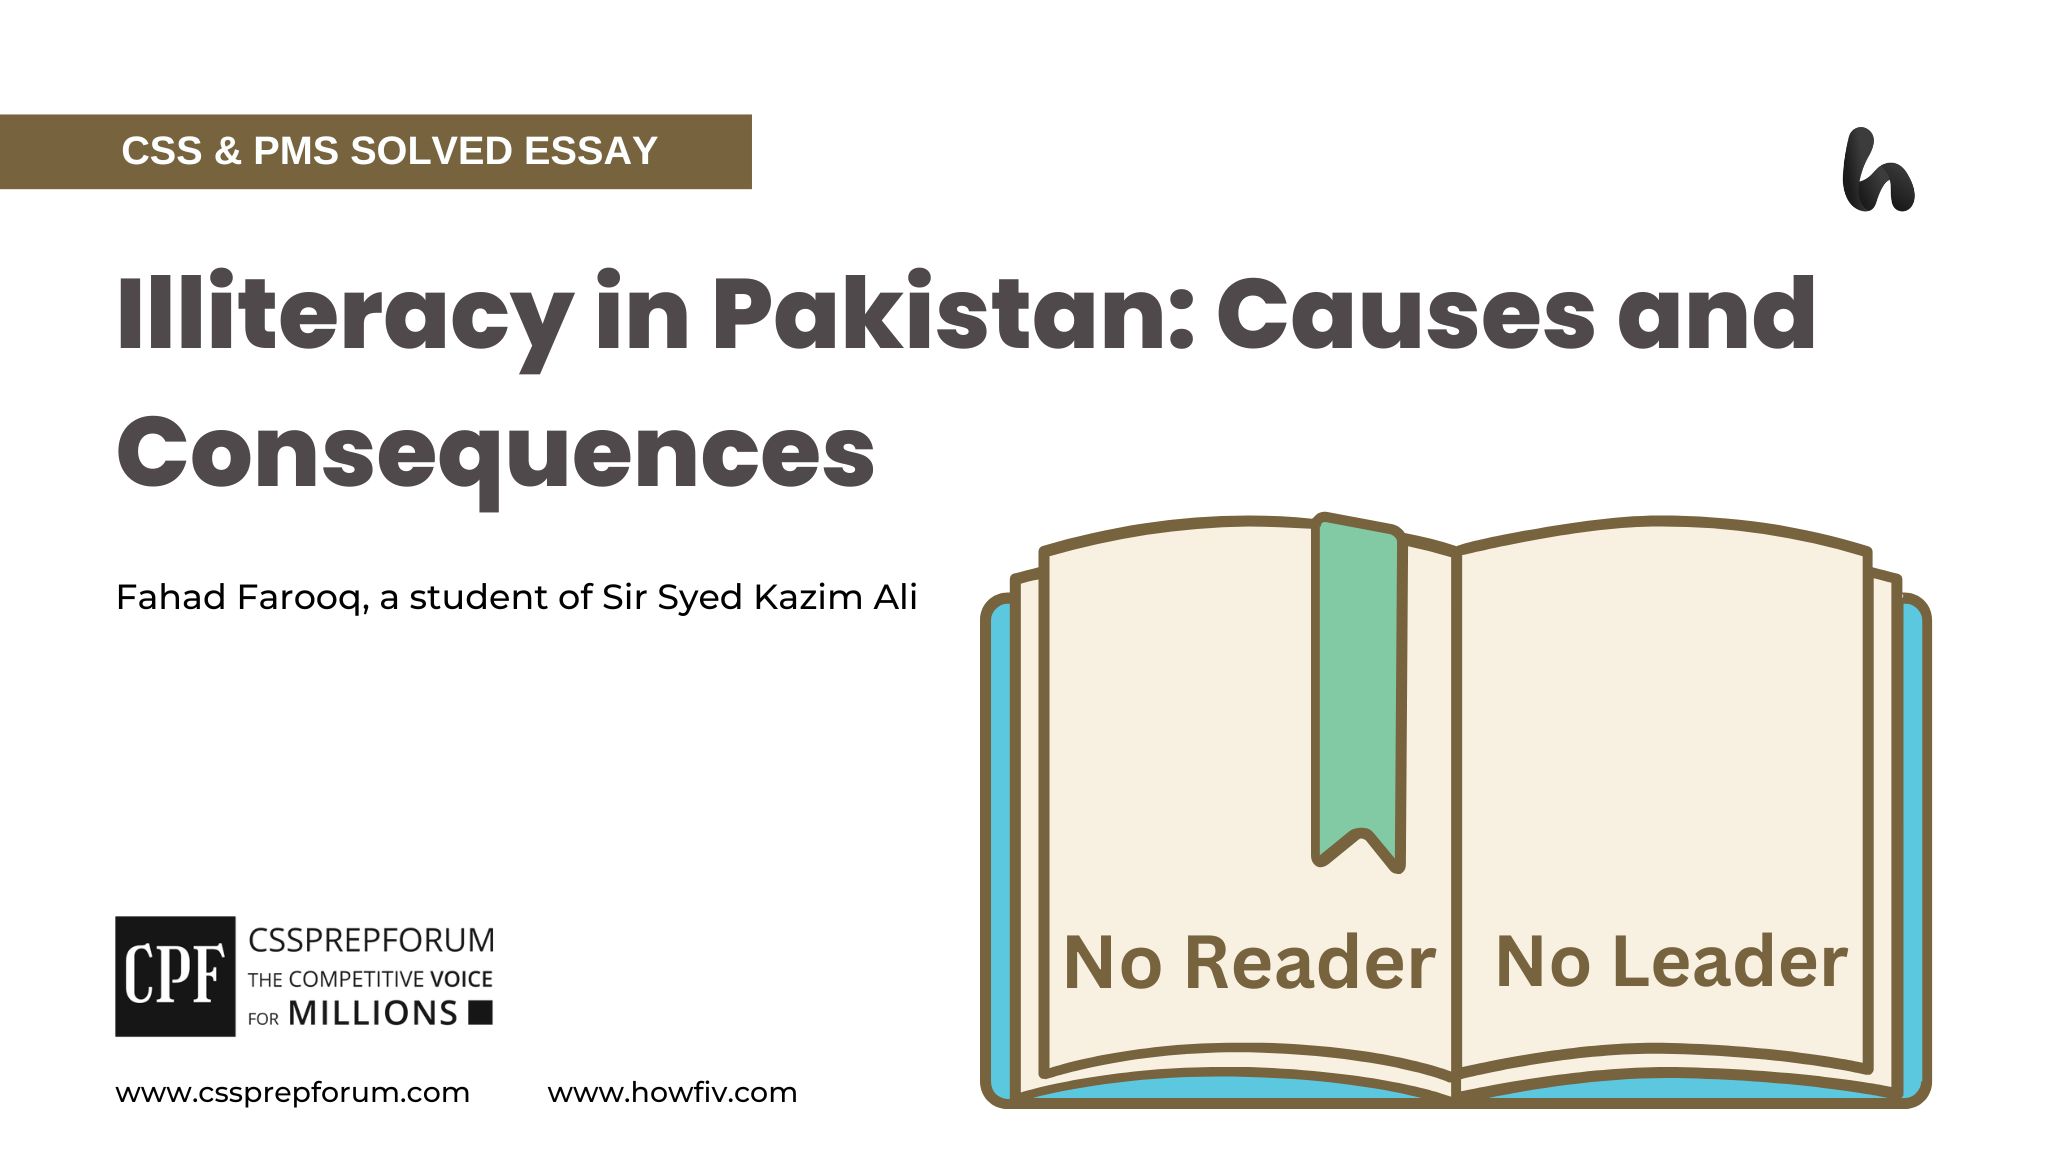 Illiteracy in Pakistan: Causes and Consequences by Fahad Farooq